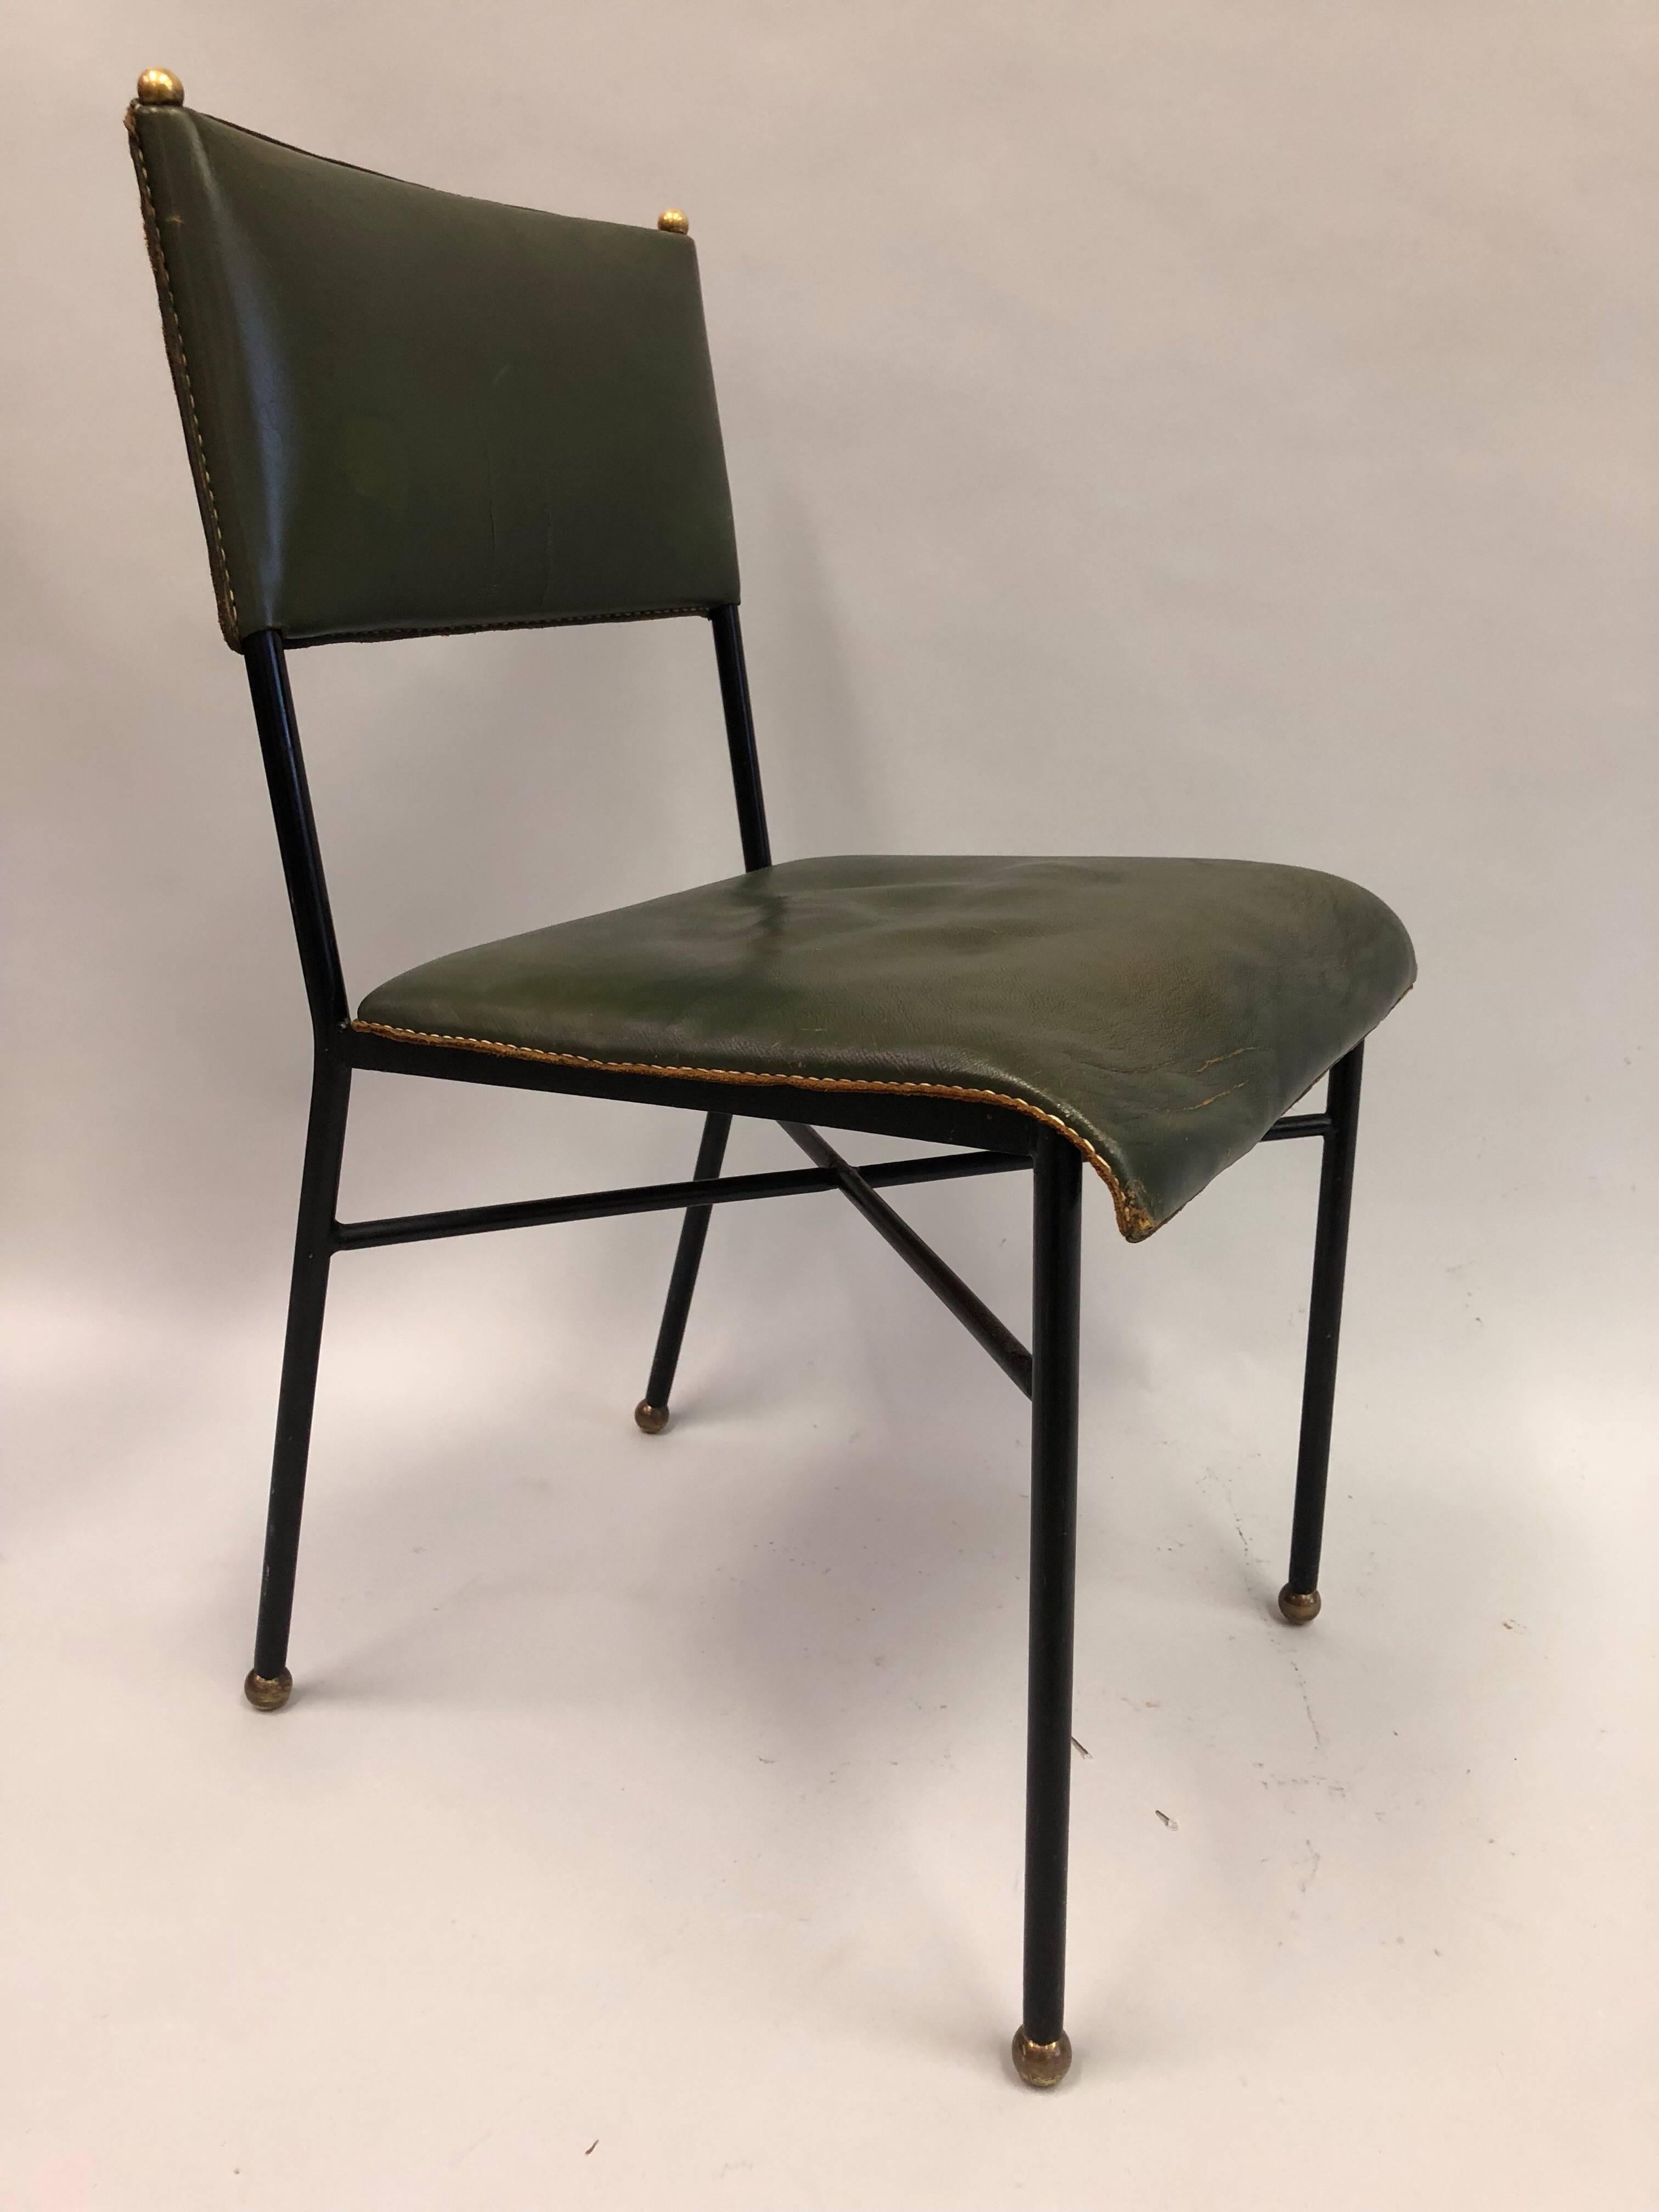 Elegant French Mid-Century Modern hand-stitched leather desk chair by Jacques Adnet.

Enameled steel frame with neoclassical X-frame stretcher and rear saber legs; the feet and details ending in round solid brass sabots and the seat and back